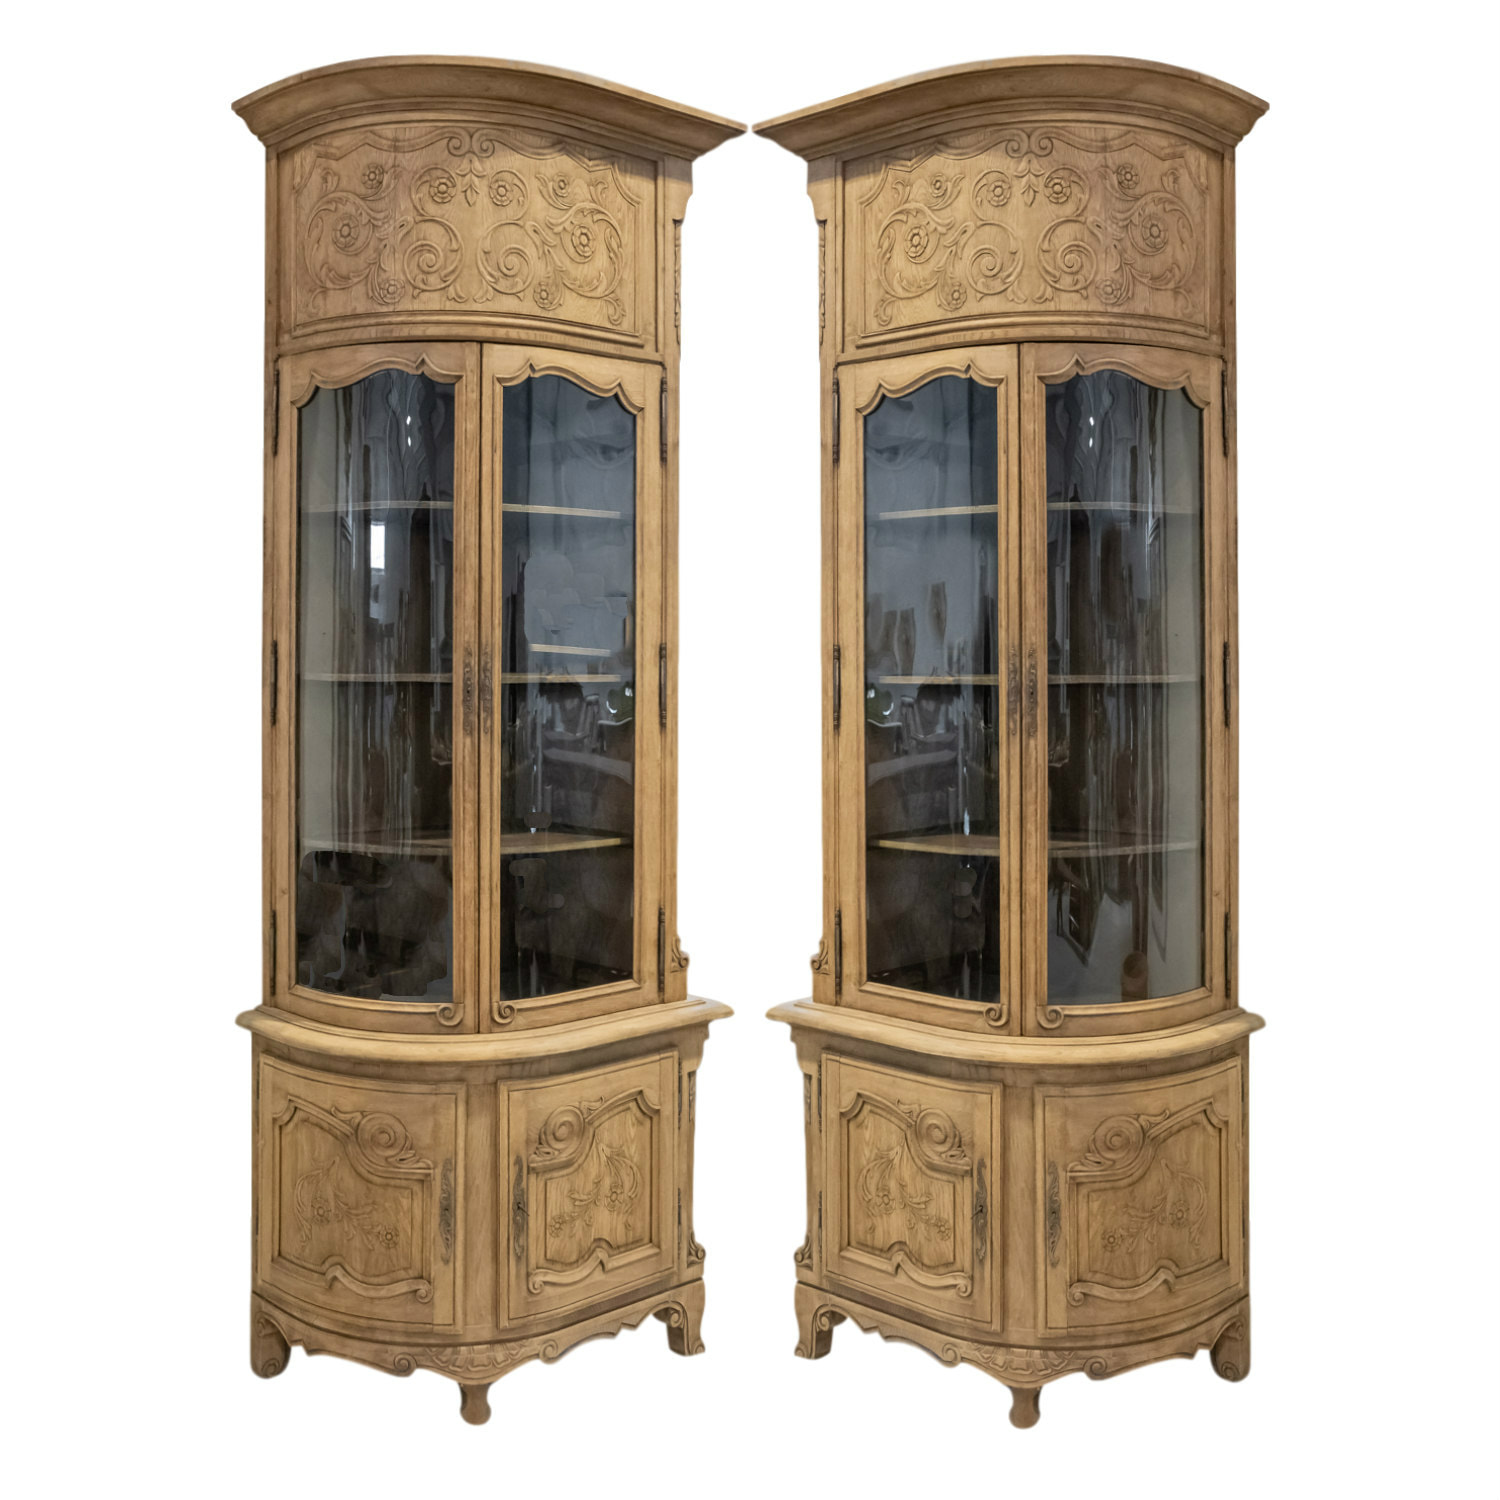 An impressive Louis XIV chinoiserie cabinet, reputedly given to Mademoiselle  Coco Chanel by the 2nd Duke of Westminster, which sold at Sotheby's London  today (13.06.97) in a sale of Important French and